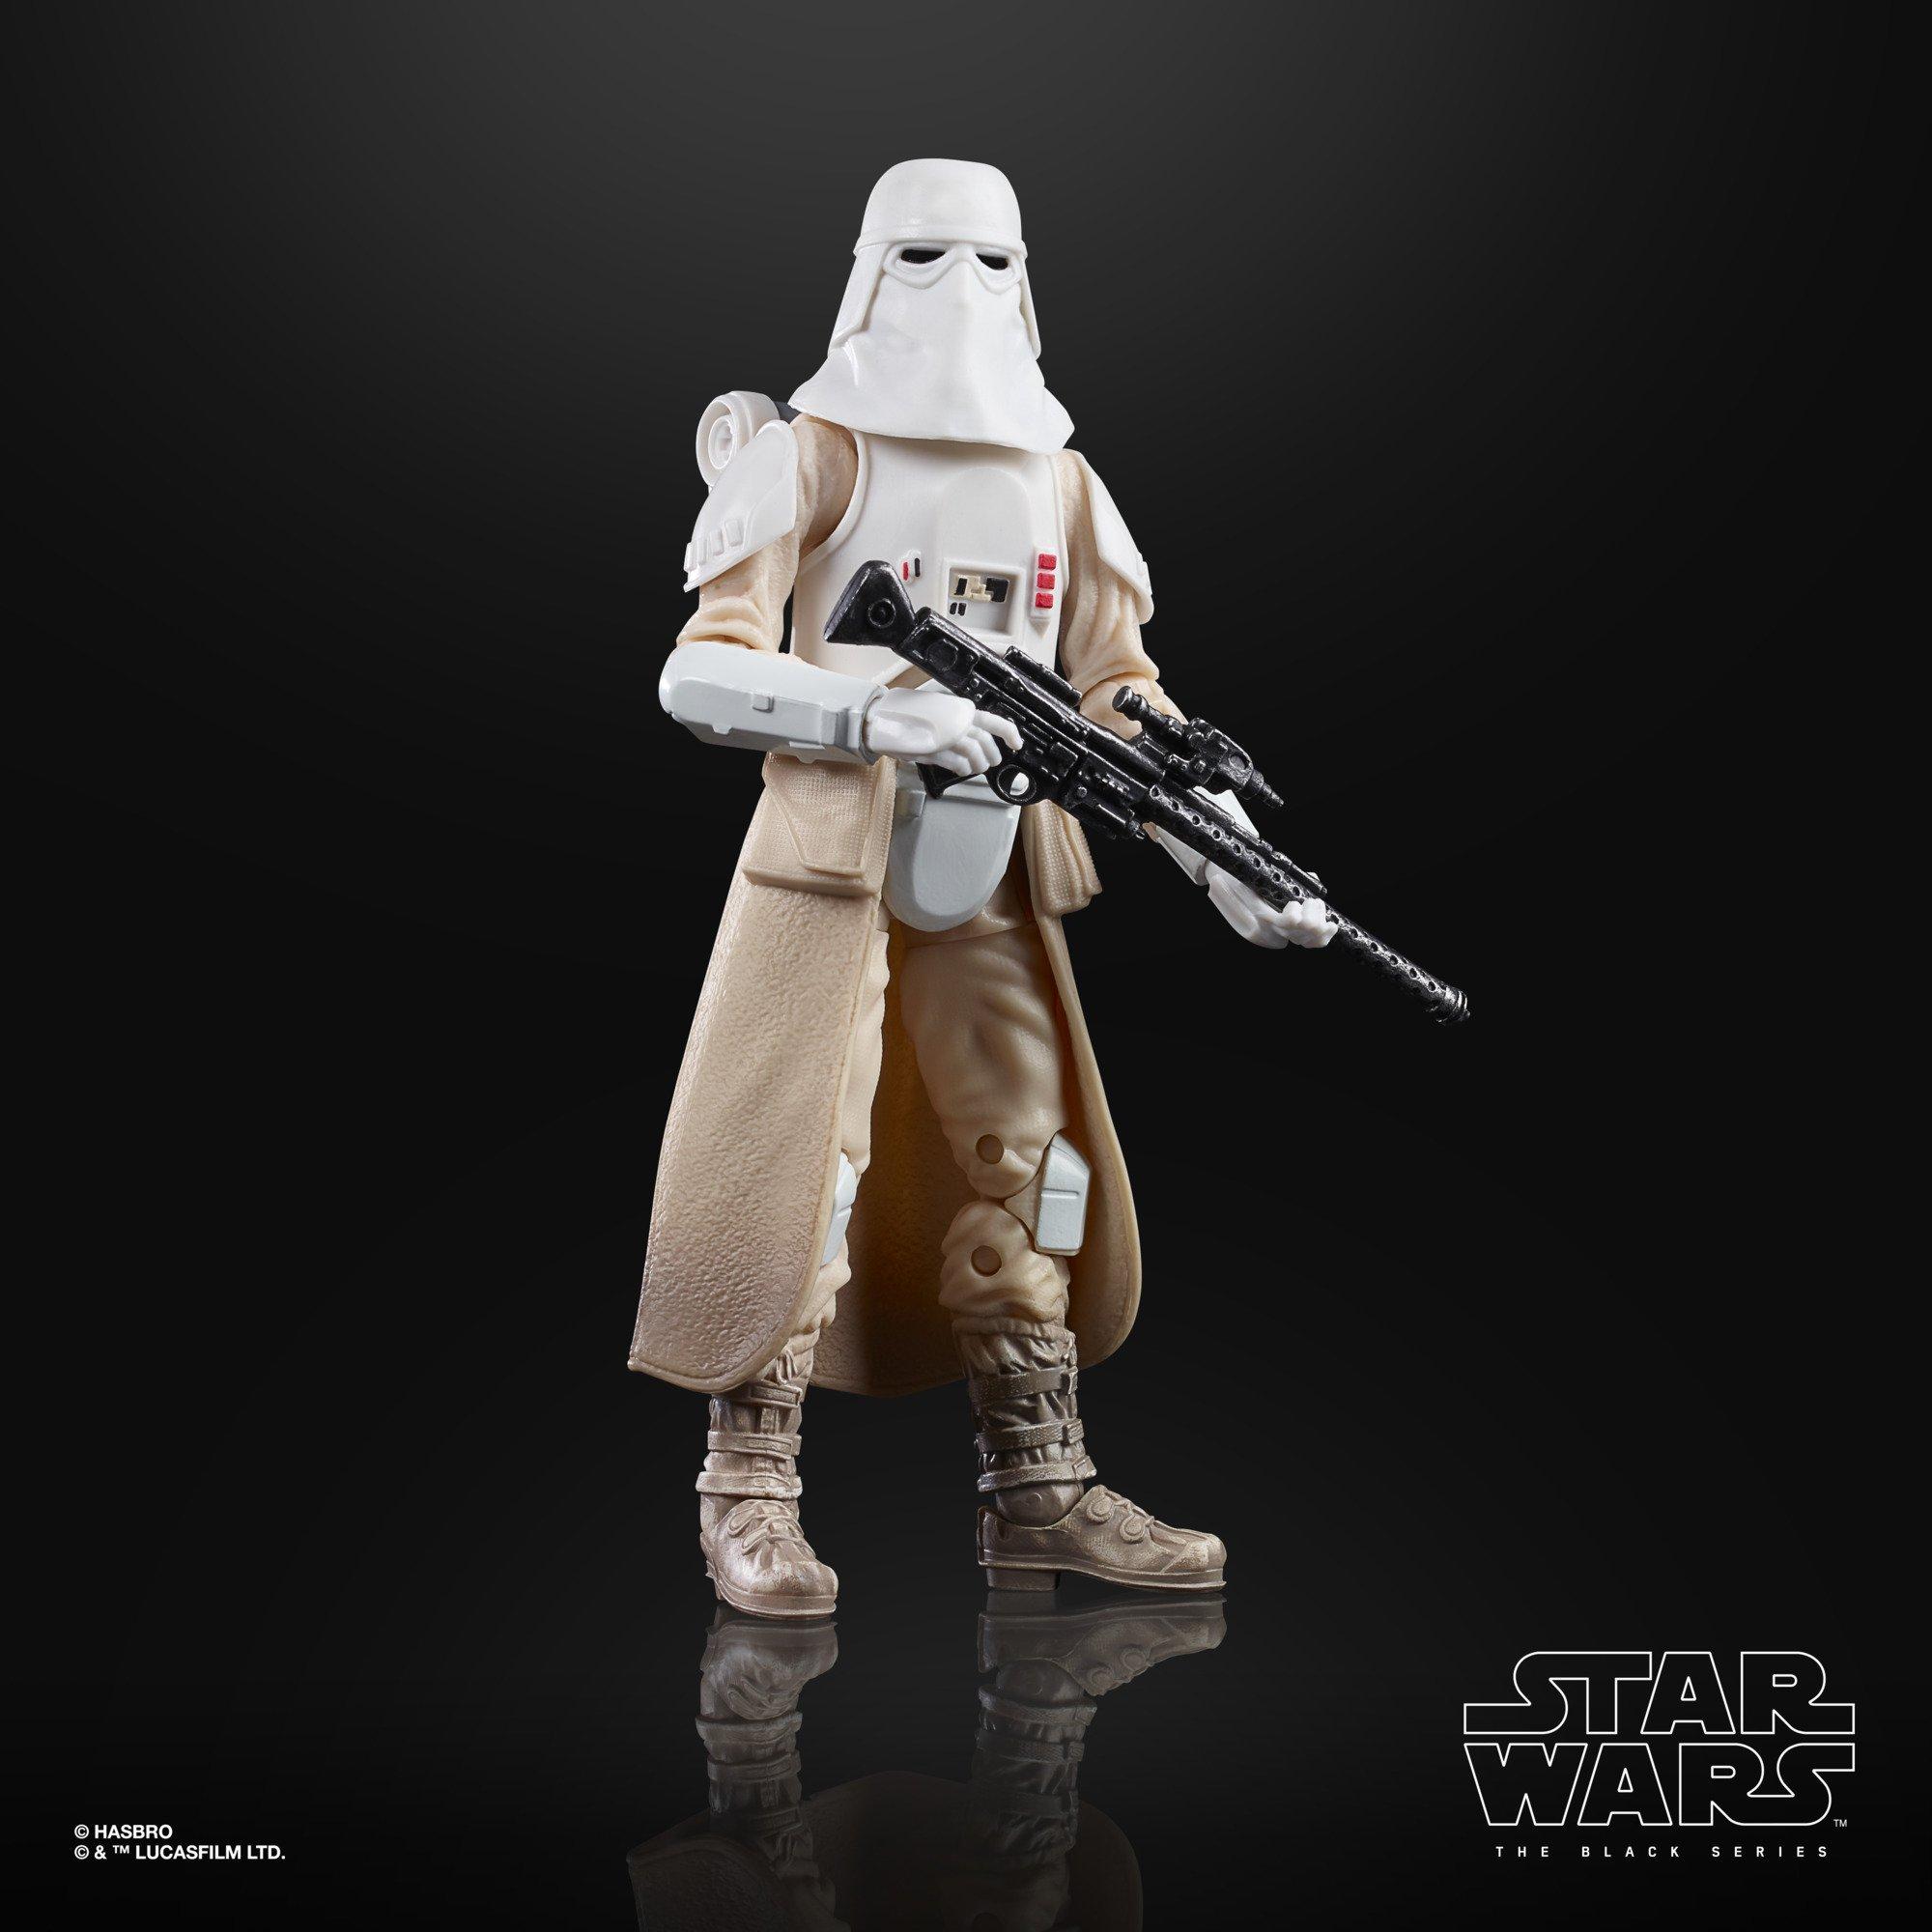 Hasbro Star Wars: The Black Series Episode V 40th Anniversary Imperial Snowtrooper (Hoth) 6-in Action Figure